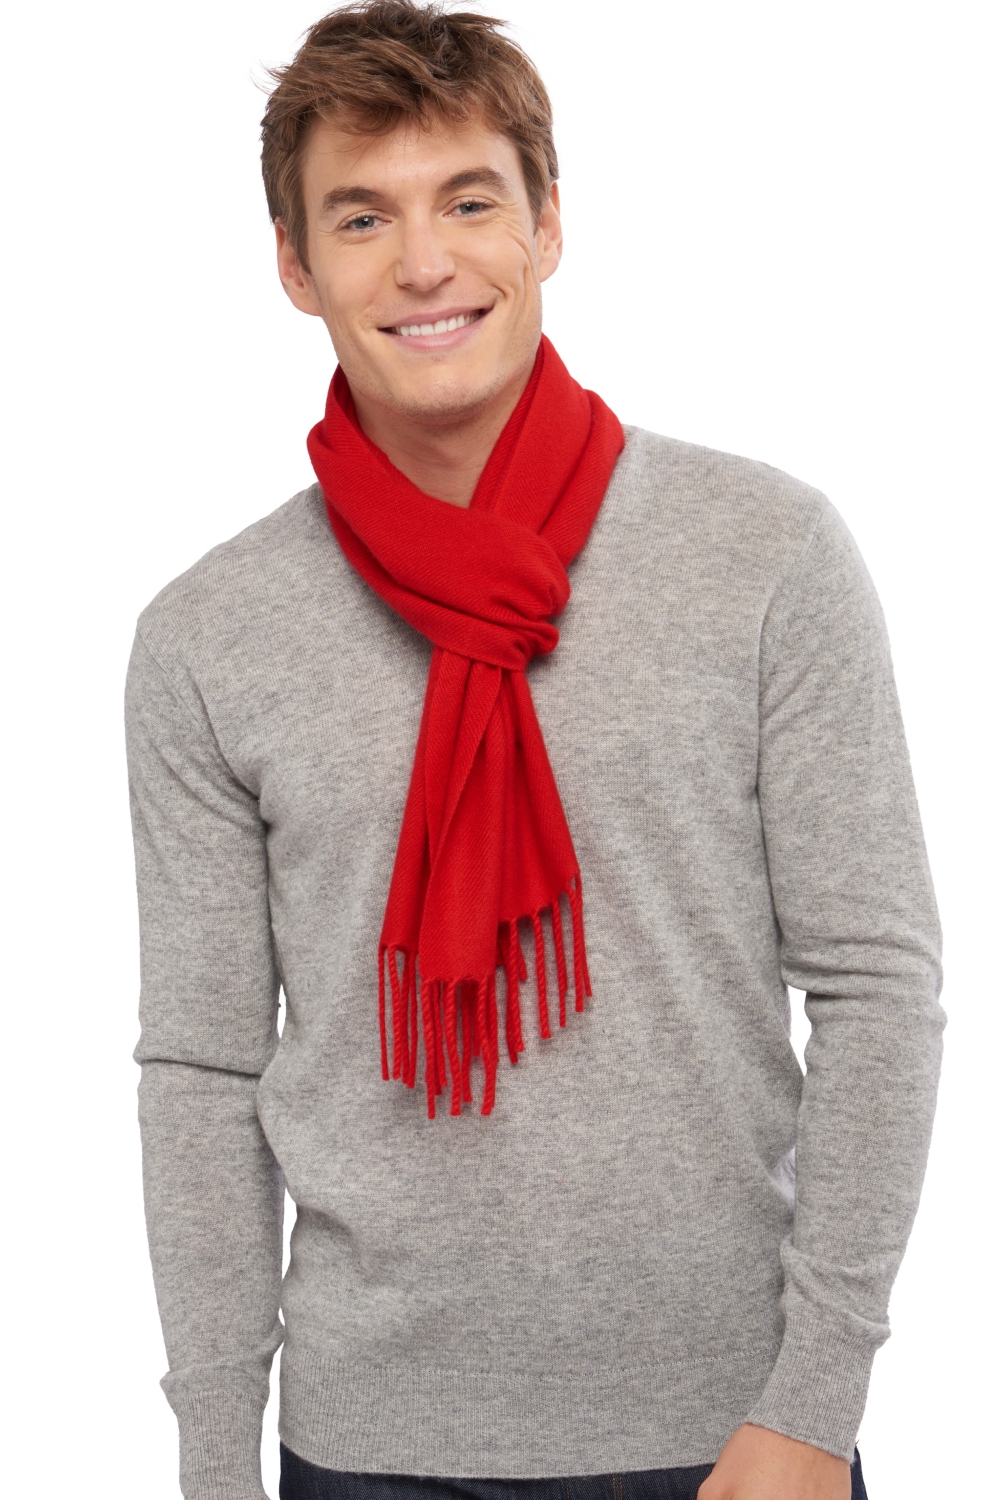 Cashmere accessories scarves mufflers zak170 flashing red 170 x 25 cm